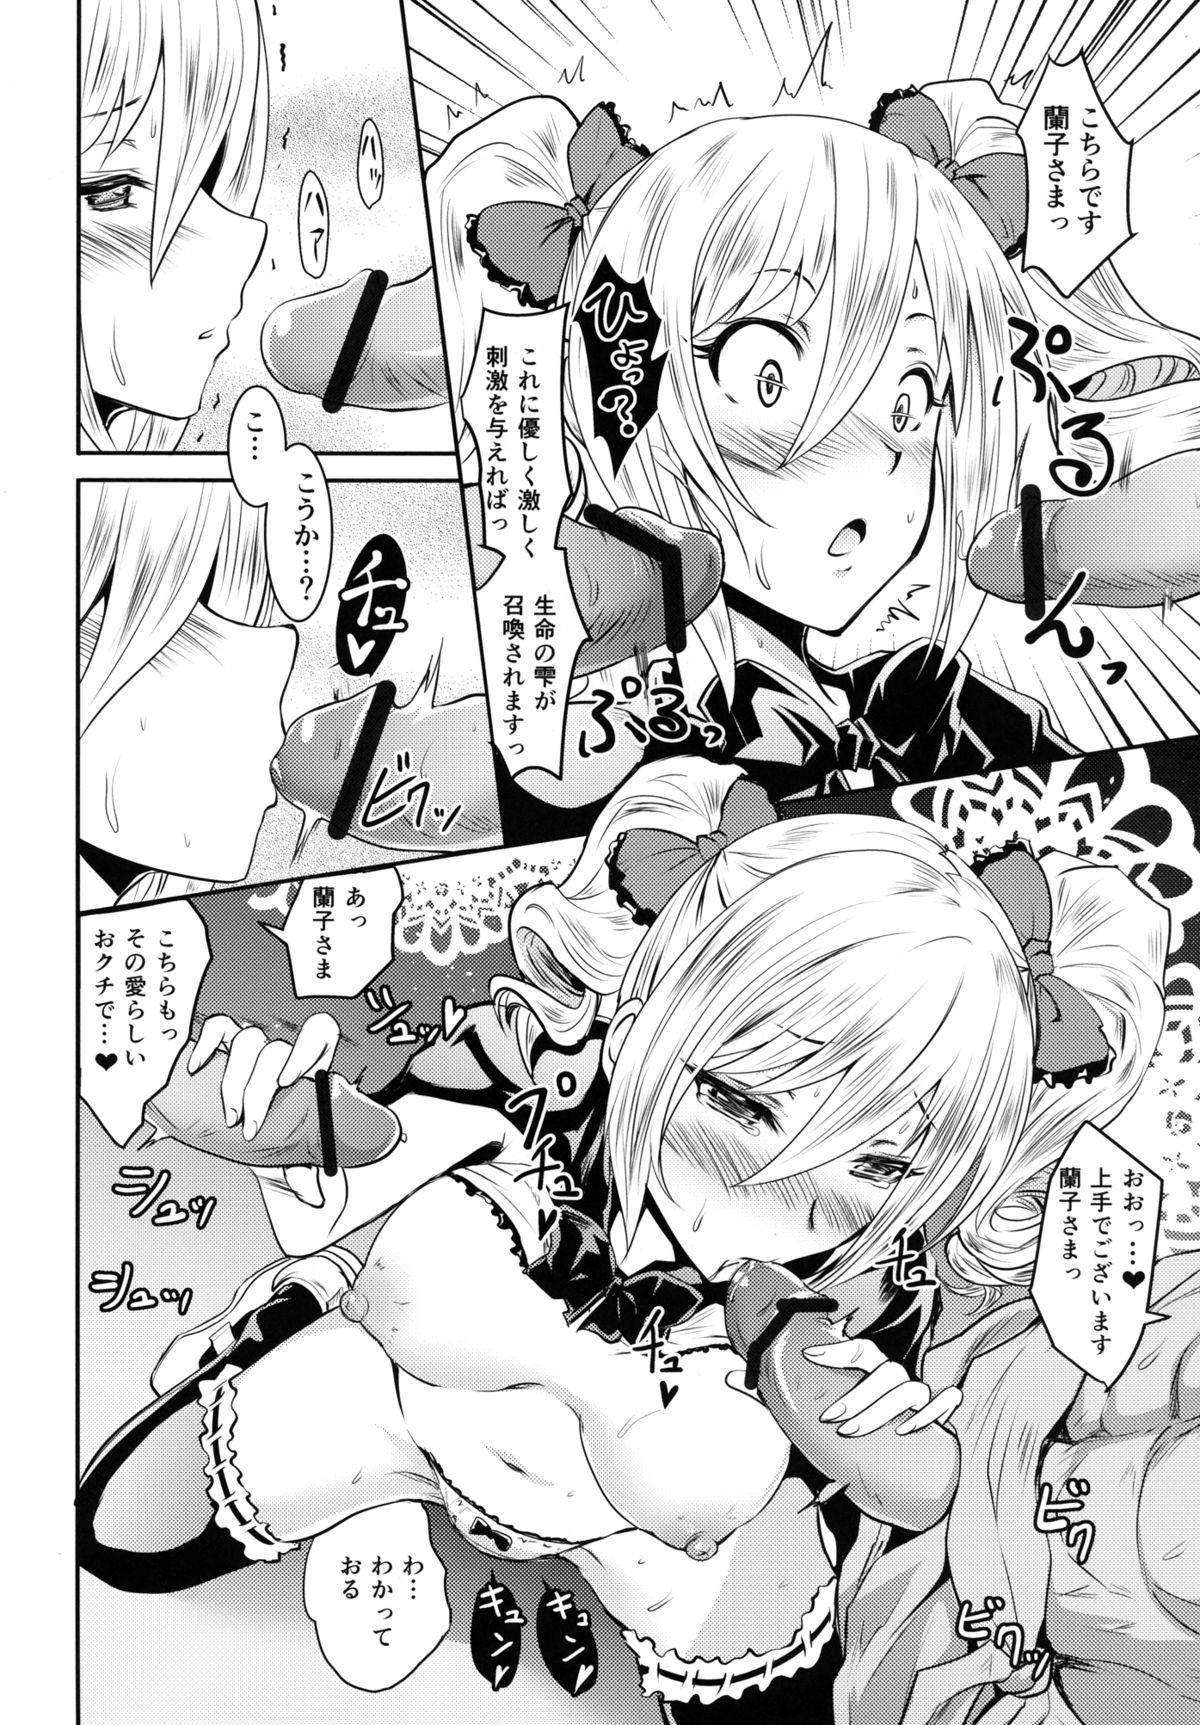 Sharing Ran KING - The idolmaster Pounded - Page 9